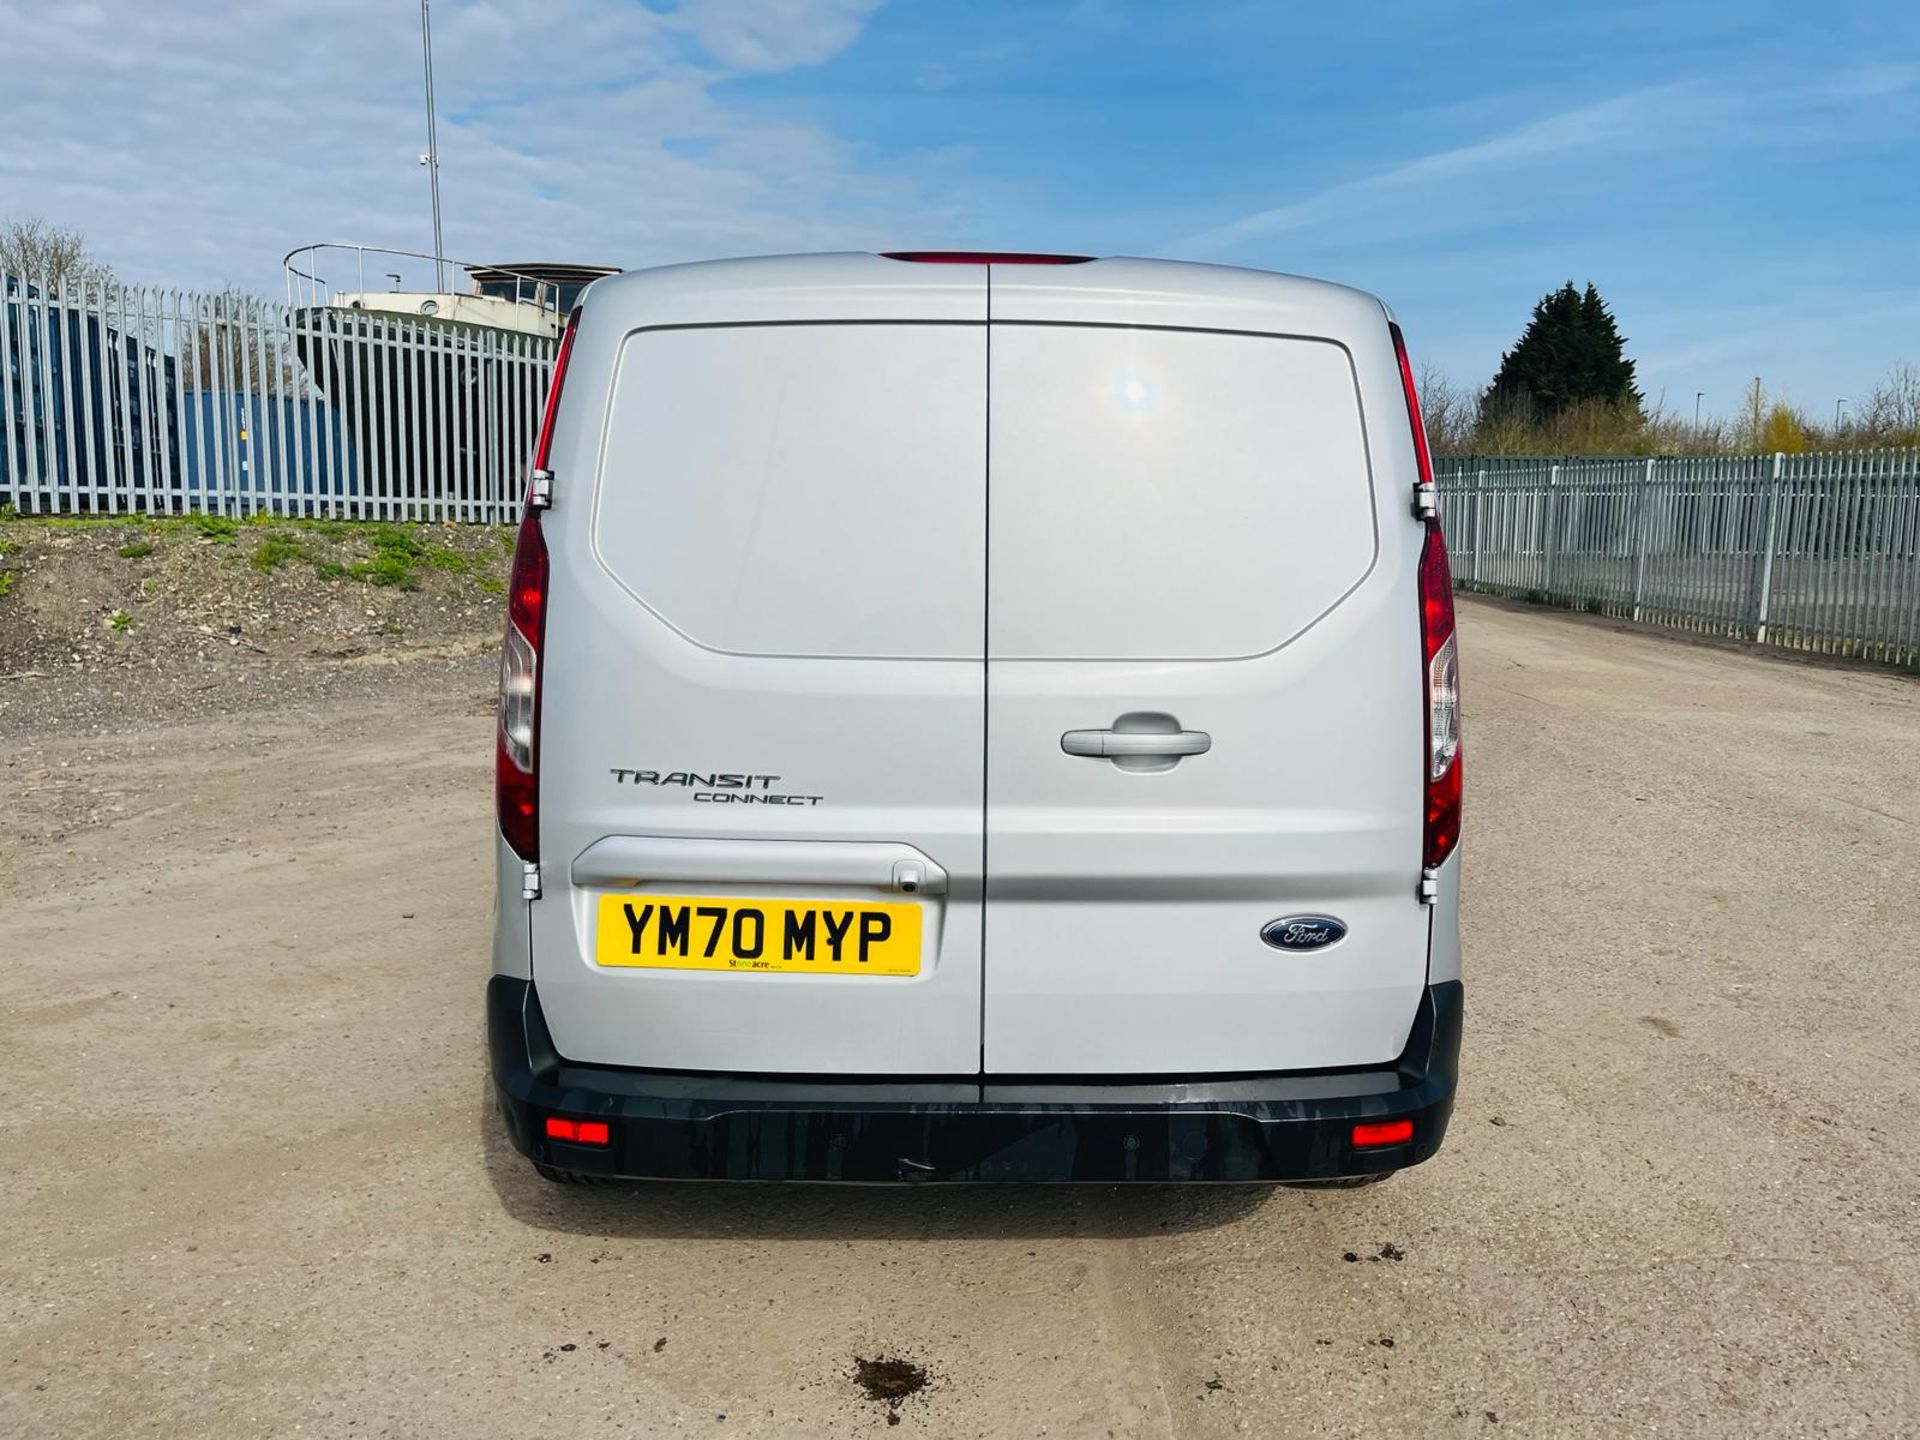 Ford Transit Connect 1.5 TDCI L1H1-2020 '70 Reg'- 1 Previous Owner -Alloy Wheels -Sat Nav - A/C - Image 9 of 28